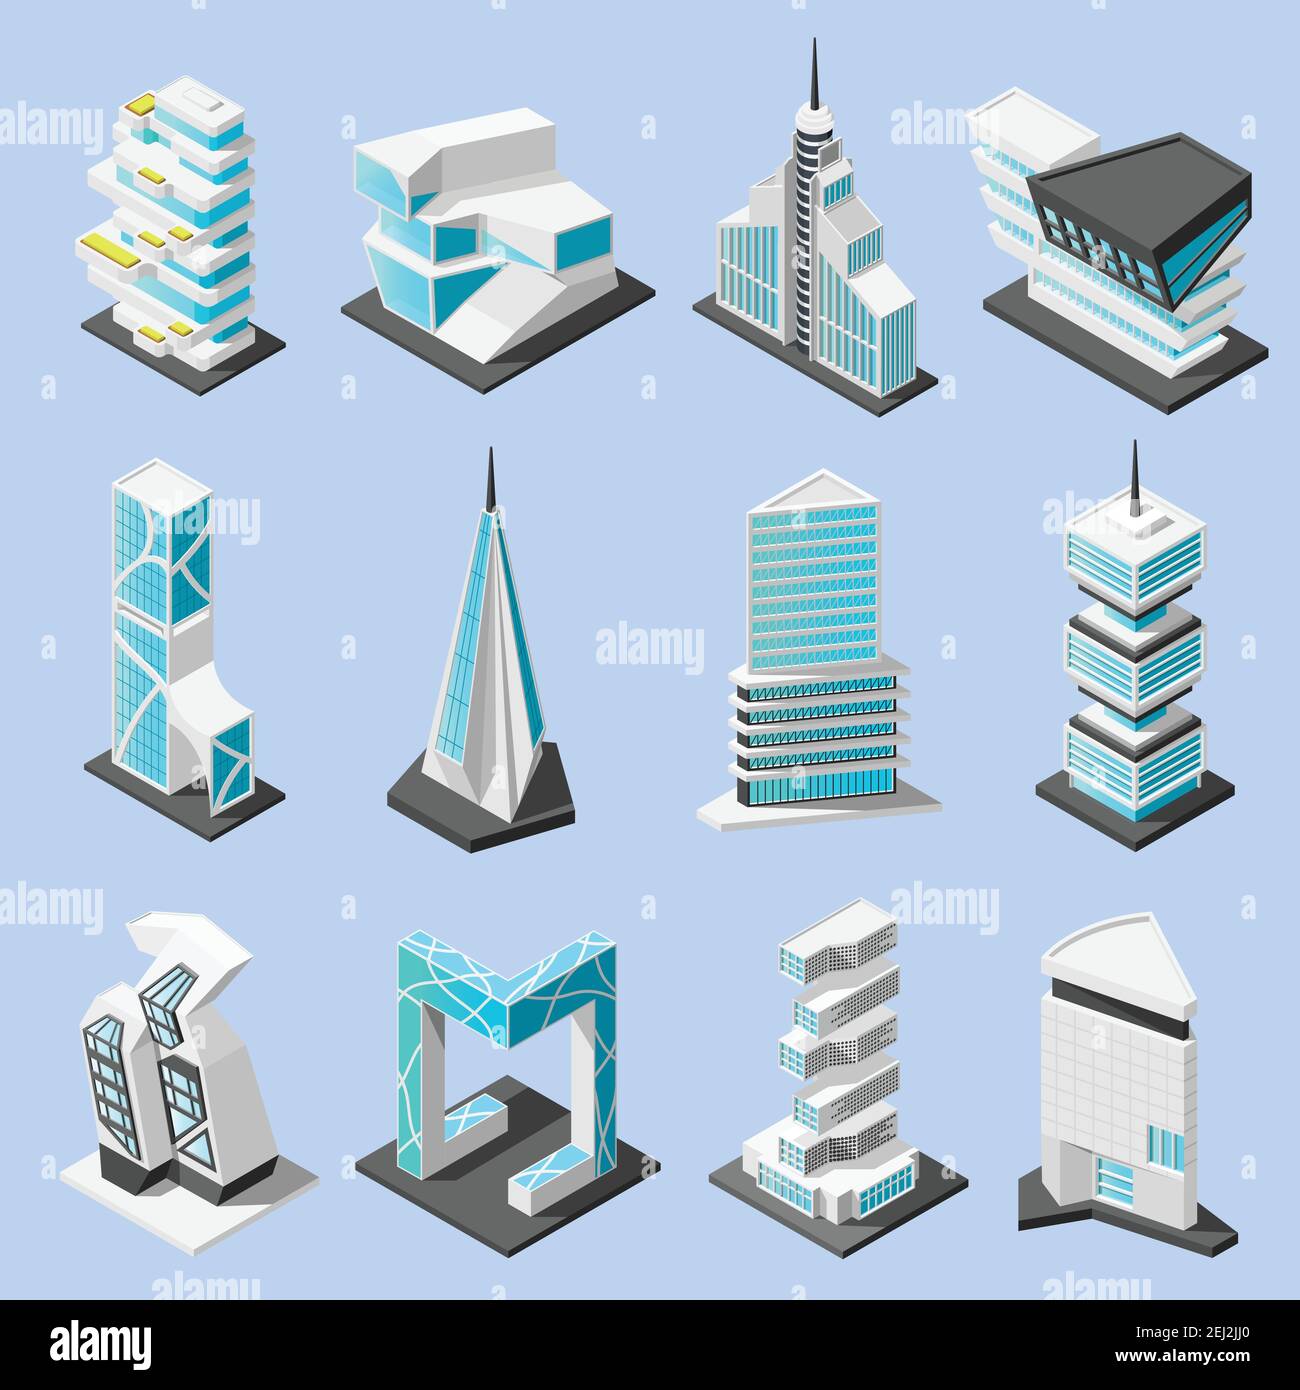 Isometric futuristic architecture set with isolated images of hi tech style modern buildings and skyscrapers vector illustration Stock Vector